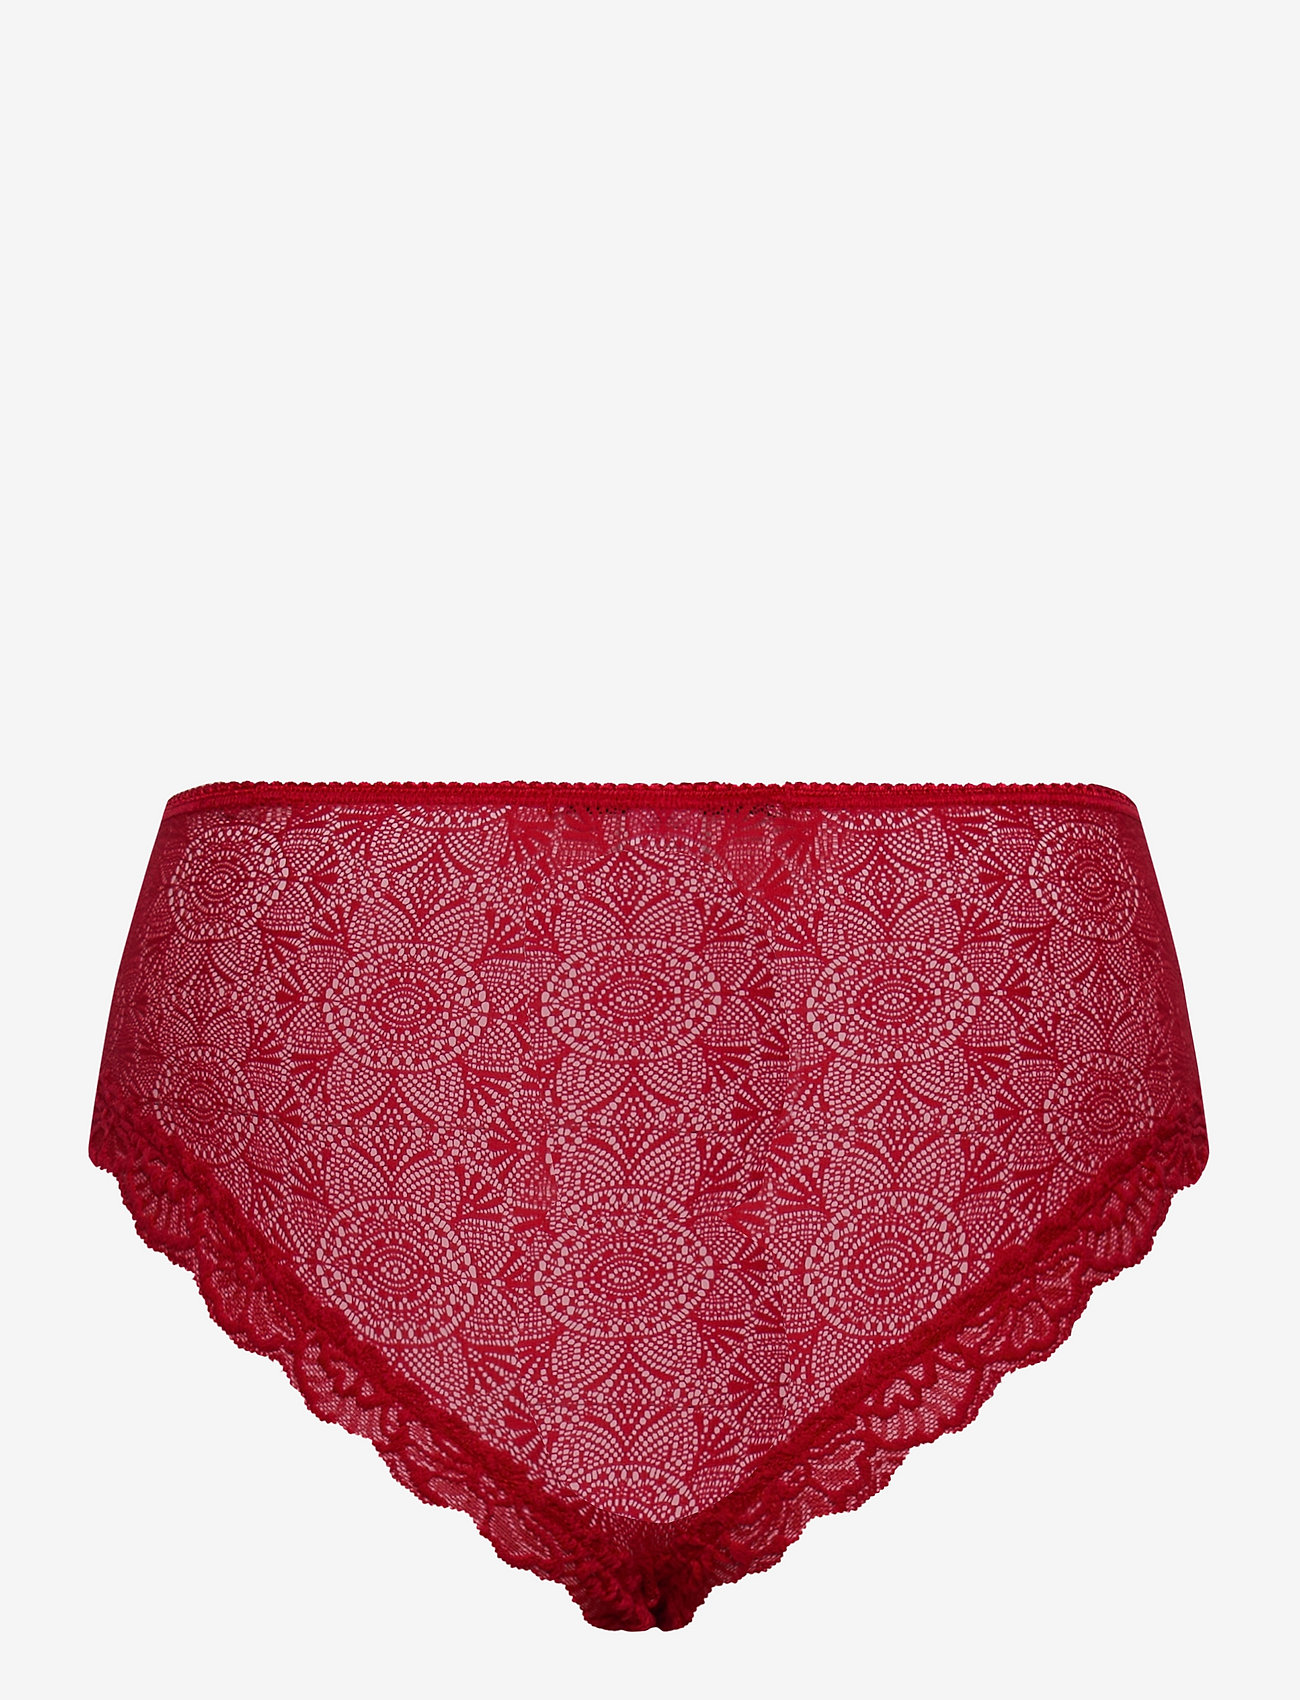 Underprotection - Fabienne hipsters - briefs - red - 1